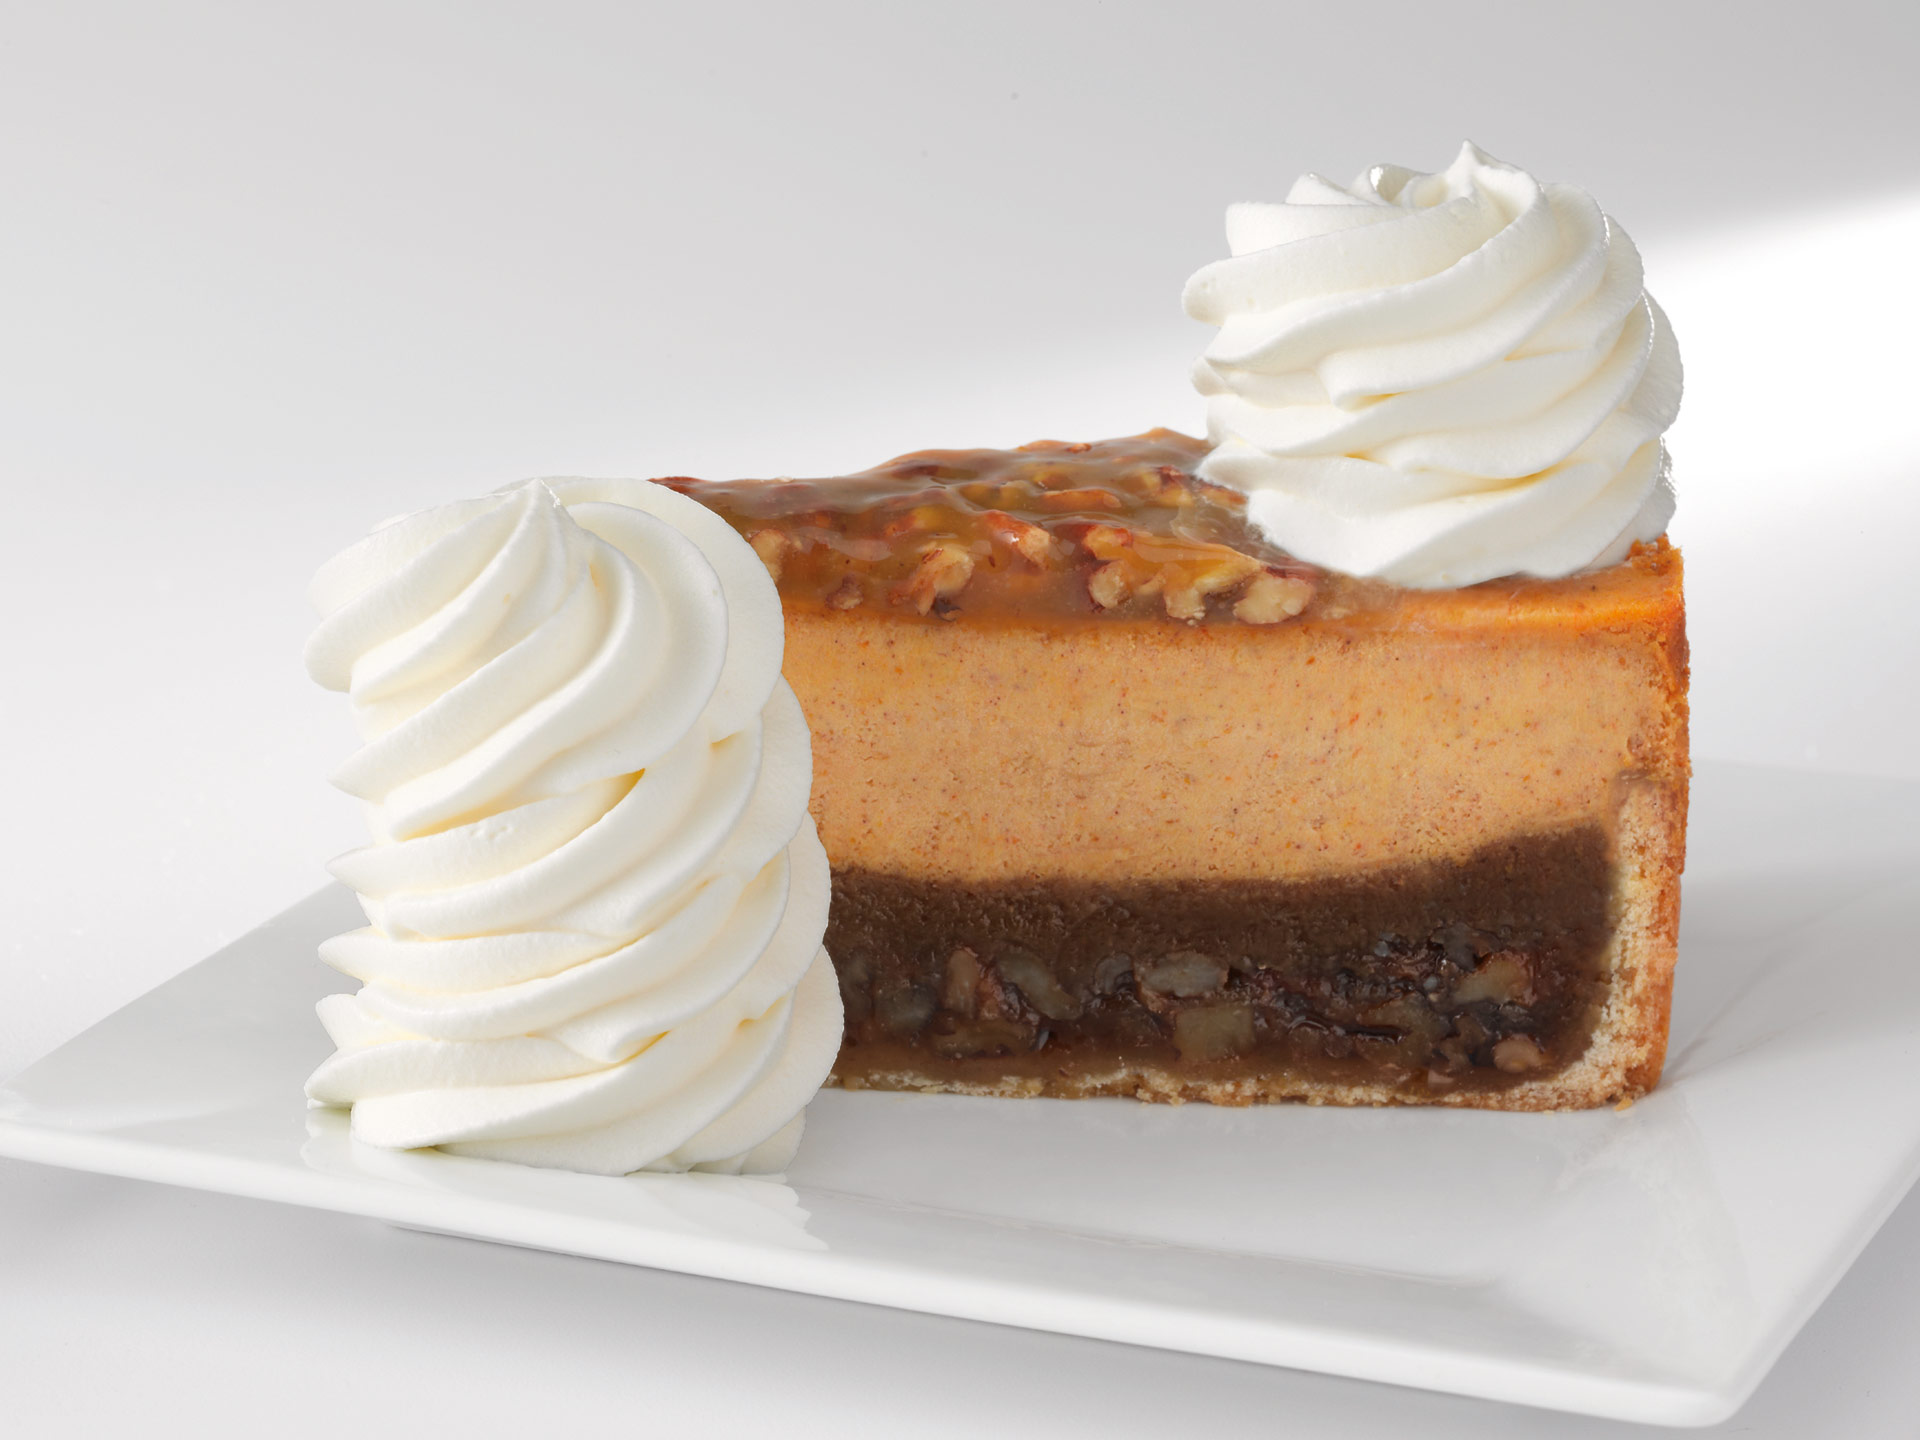 Irresistible Pumpkin Dishes from Cheesecake Factory and Marie Callender’s